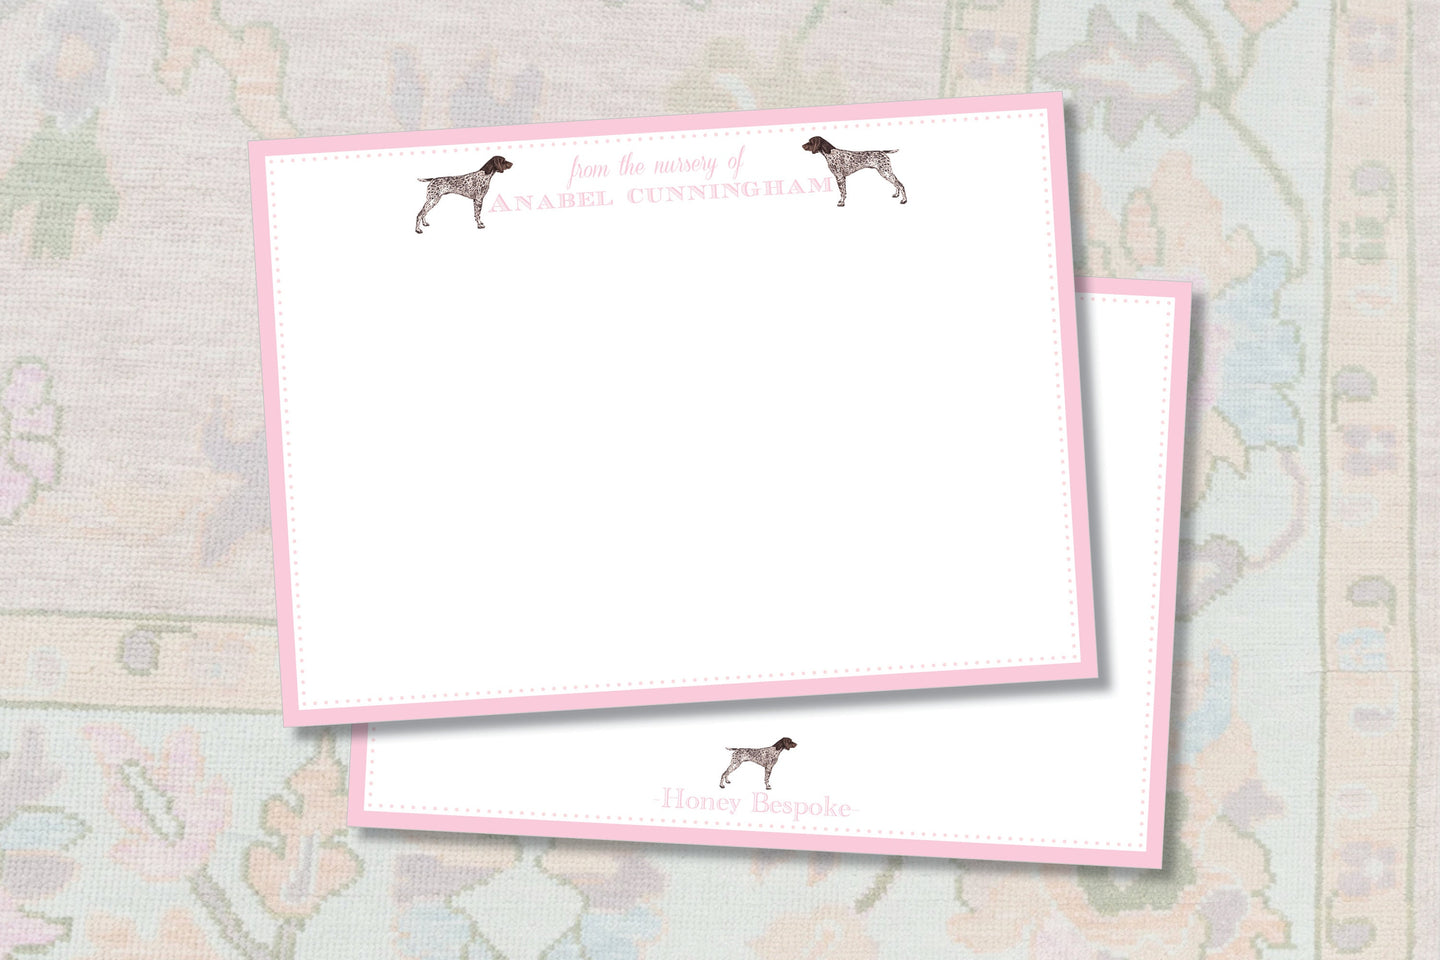 Watercolor Personalized GSP Stationery / From The Nursery of Stationery / German Shorthaired Pointer / Girls Stationery / Classic / Preppy